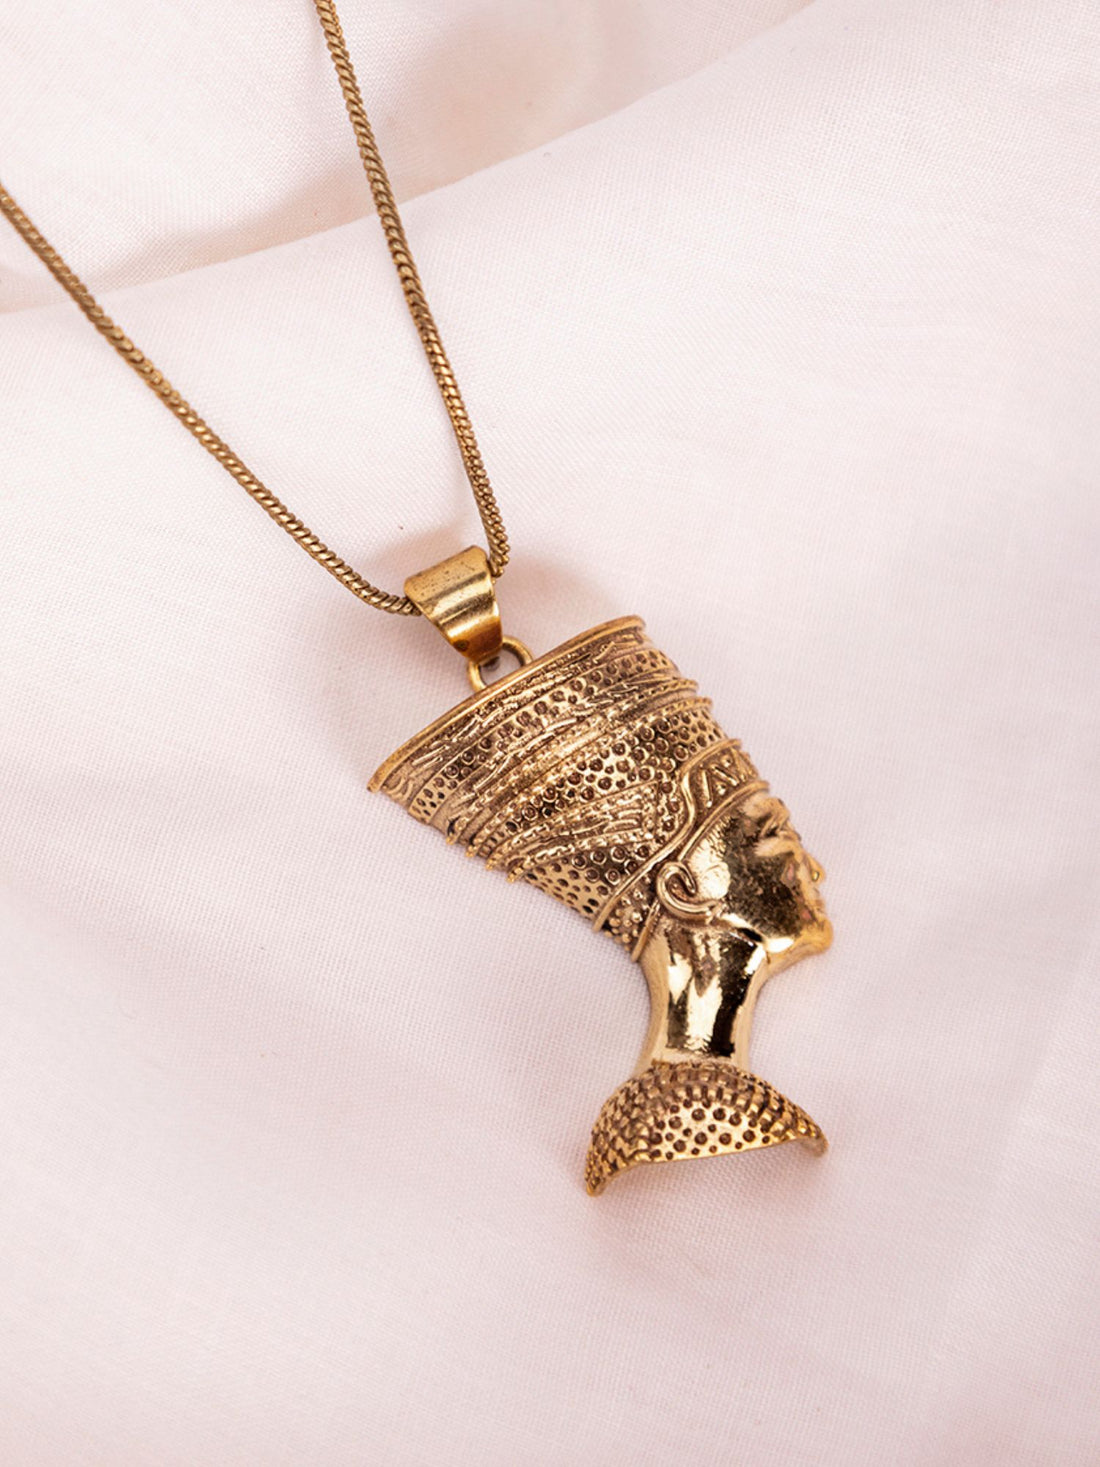 Contemporary Gold and Silver Pendant With Chain By Studio One Love